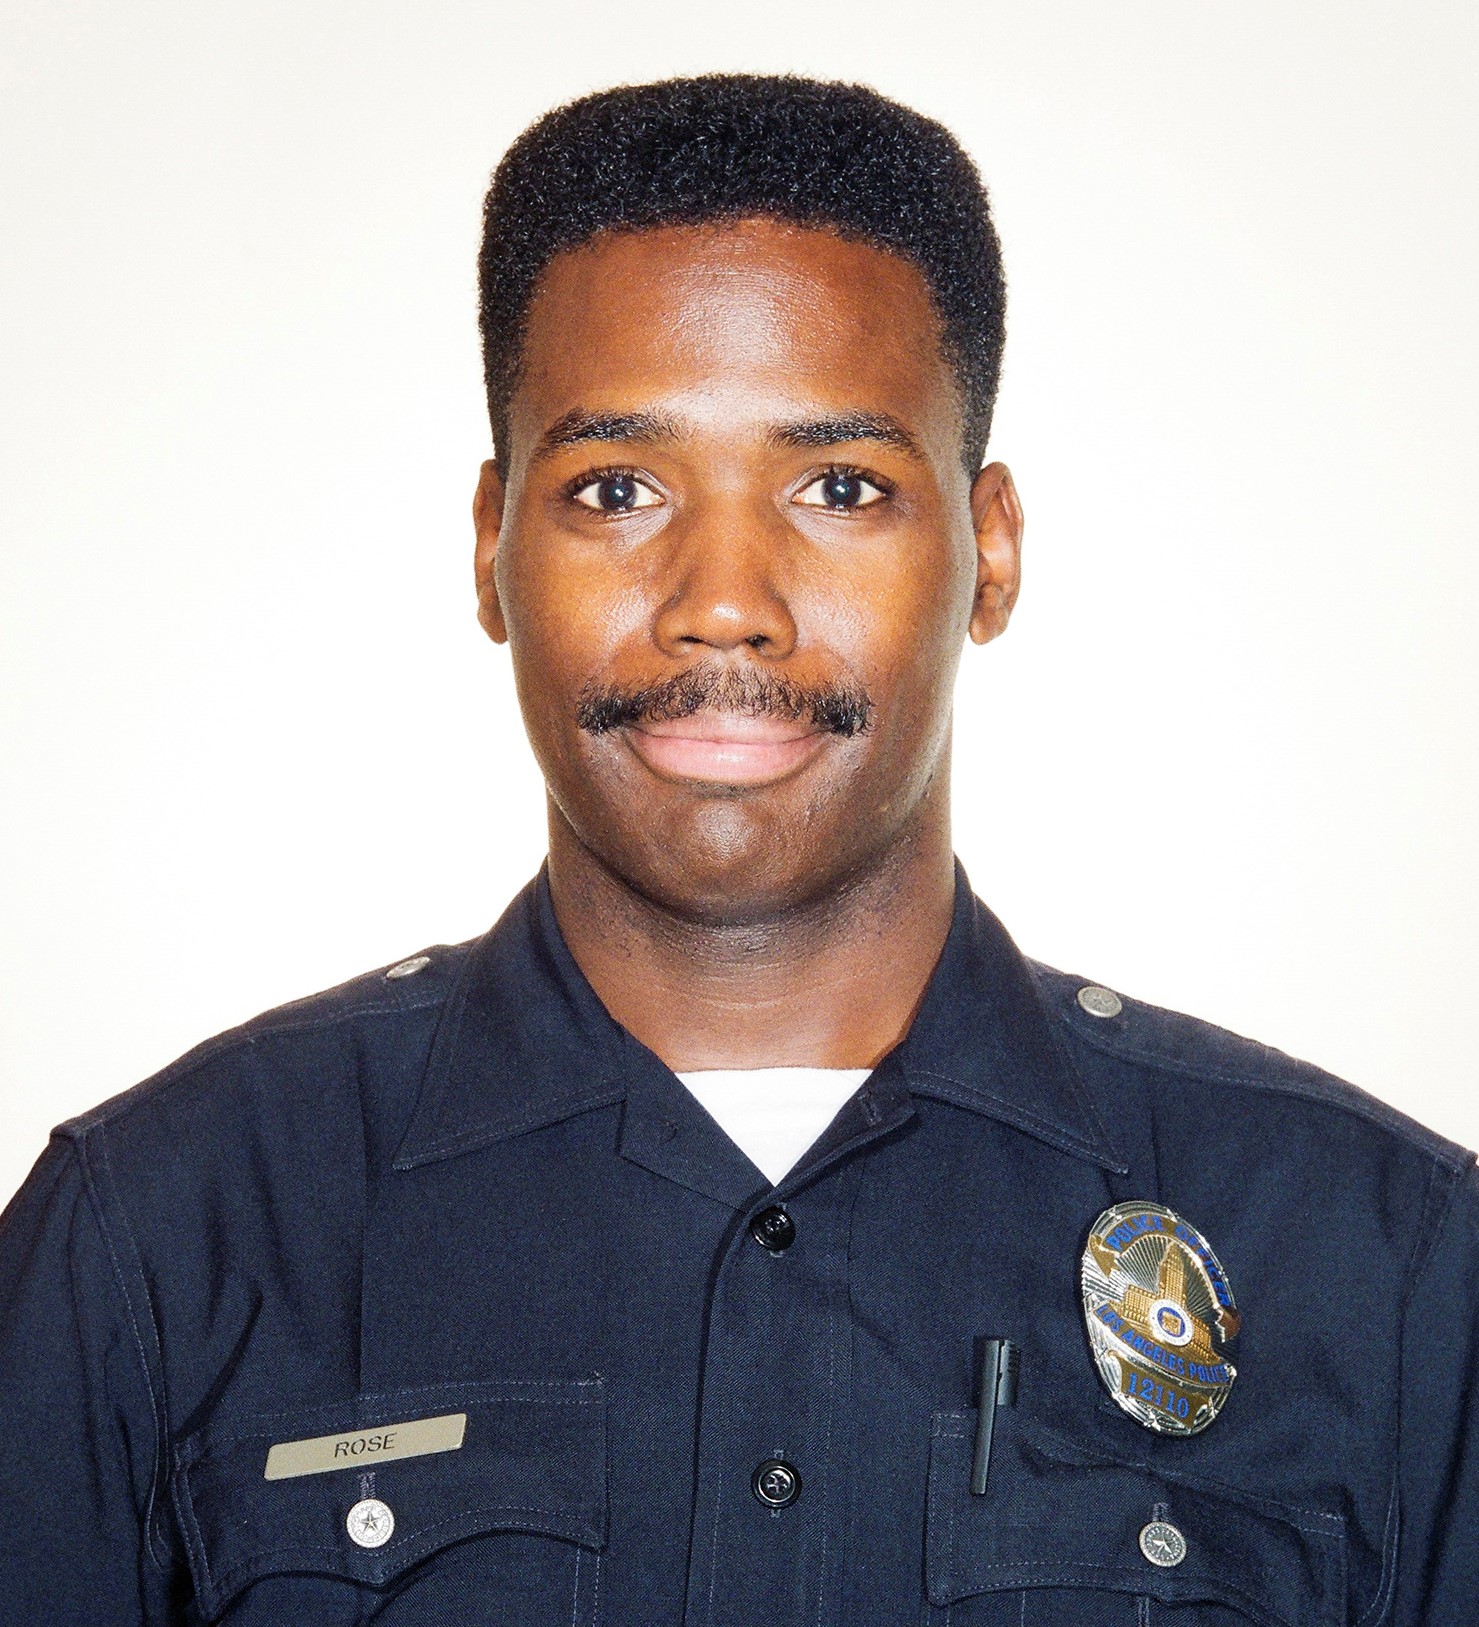 Police Officer George A. Rose, Jr. | Los Angeles Police Department, California